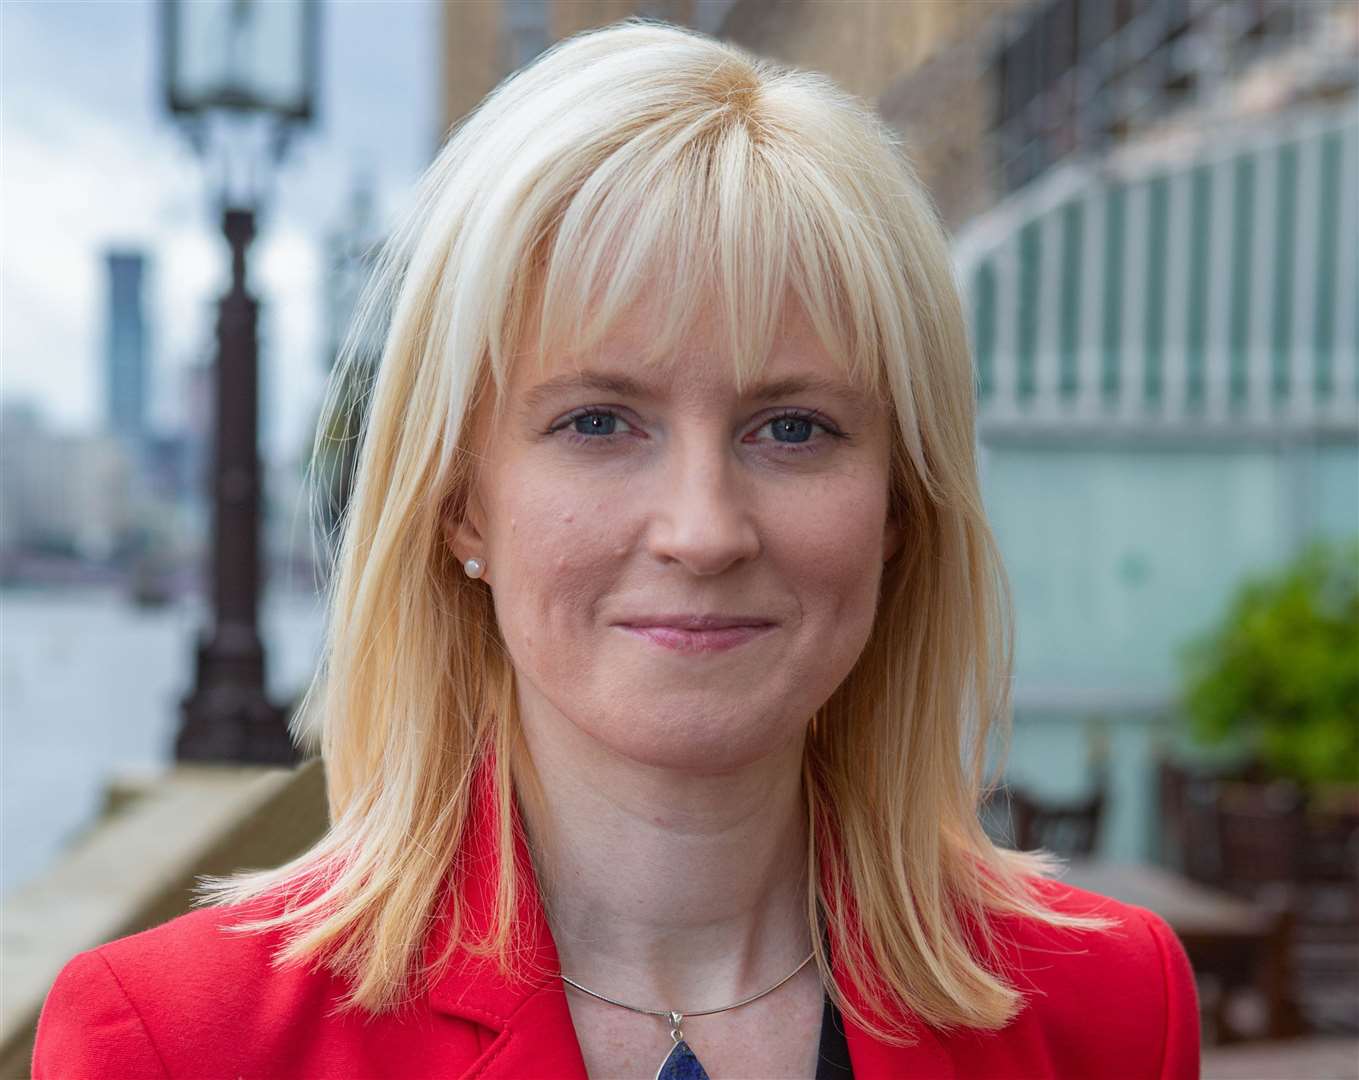 Canterbury's Labour MP Rosie Duffield has been mentioned in hundreds of 'toxic' tweets